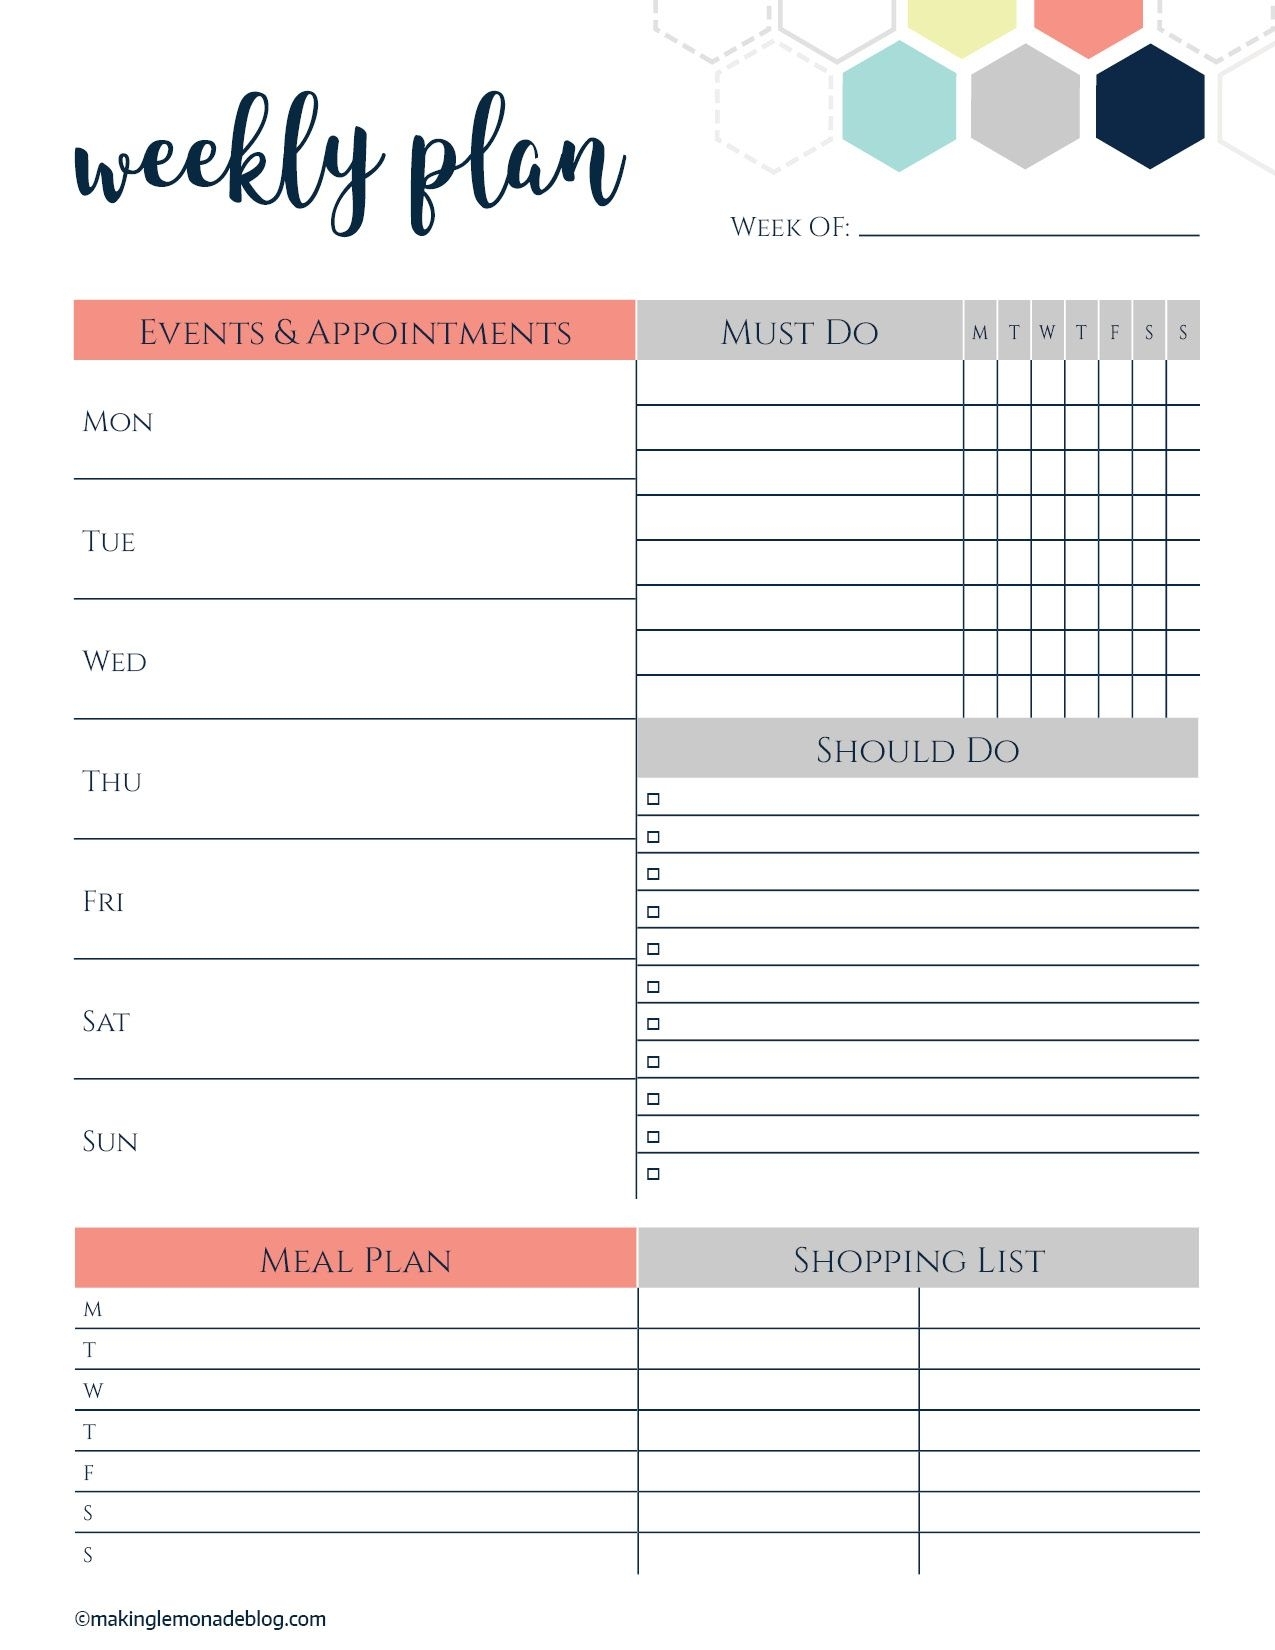 Slayyyyy Those Goals! This Free Printable Weekly Planner Organizes with regard to Free Printable Weekly Schedule Planner